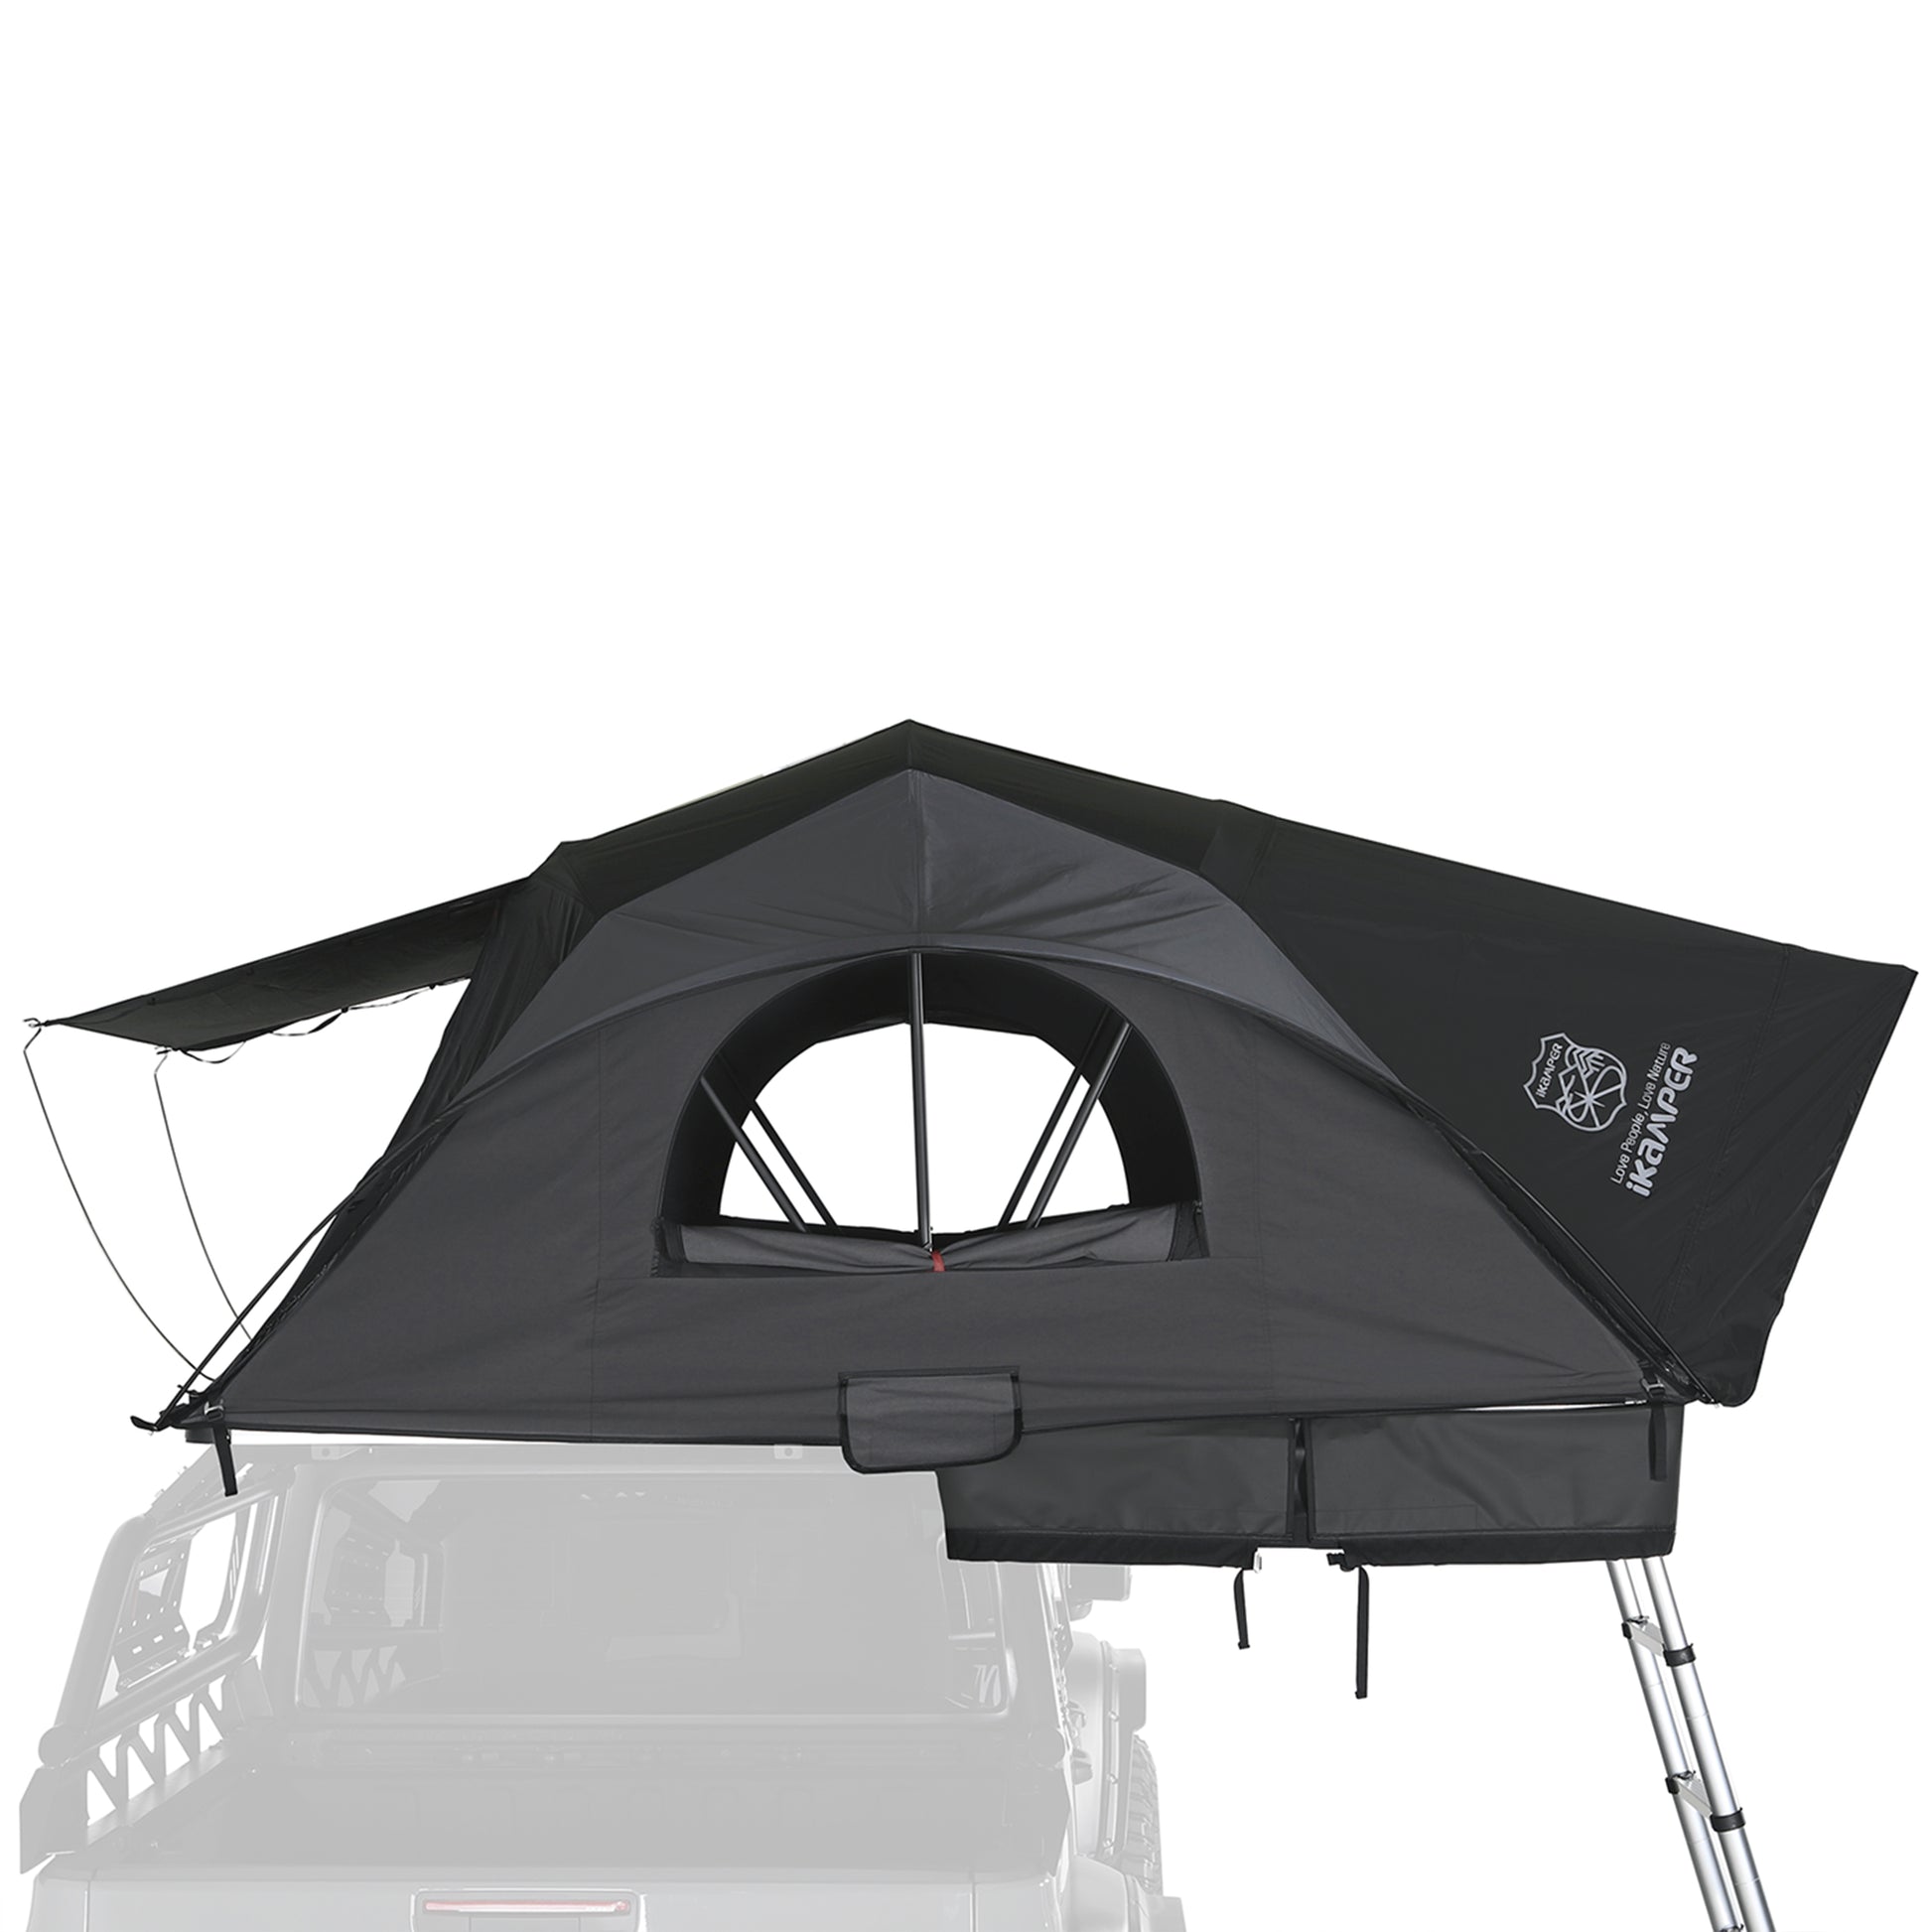 iKamper X Cover 2.0 - Hybrid Hard and Soft Shell Roof Top Tent